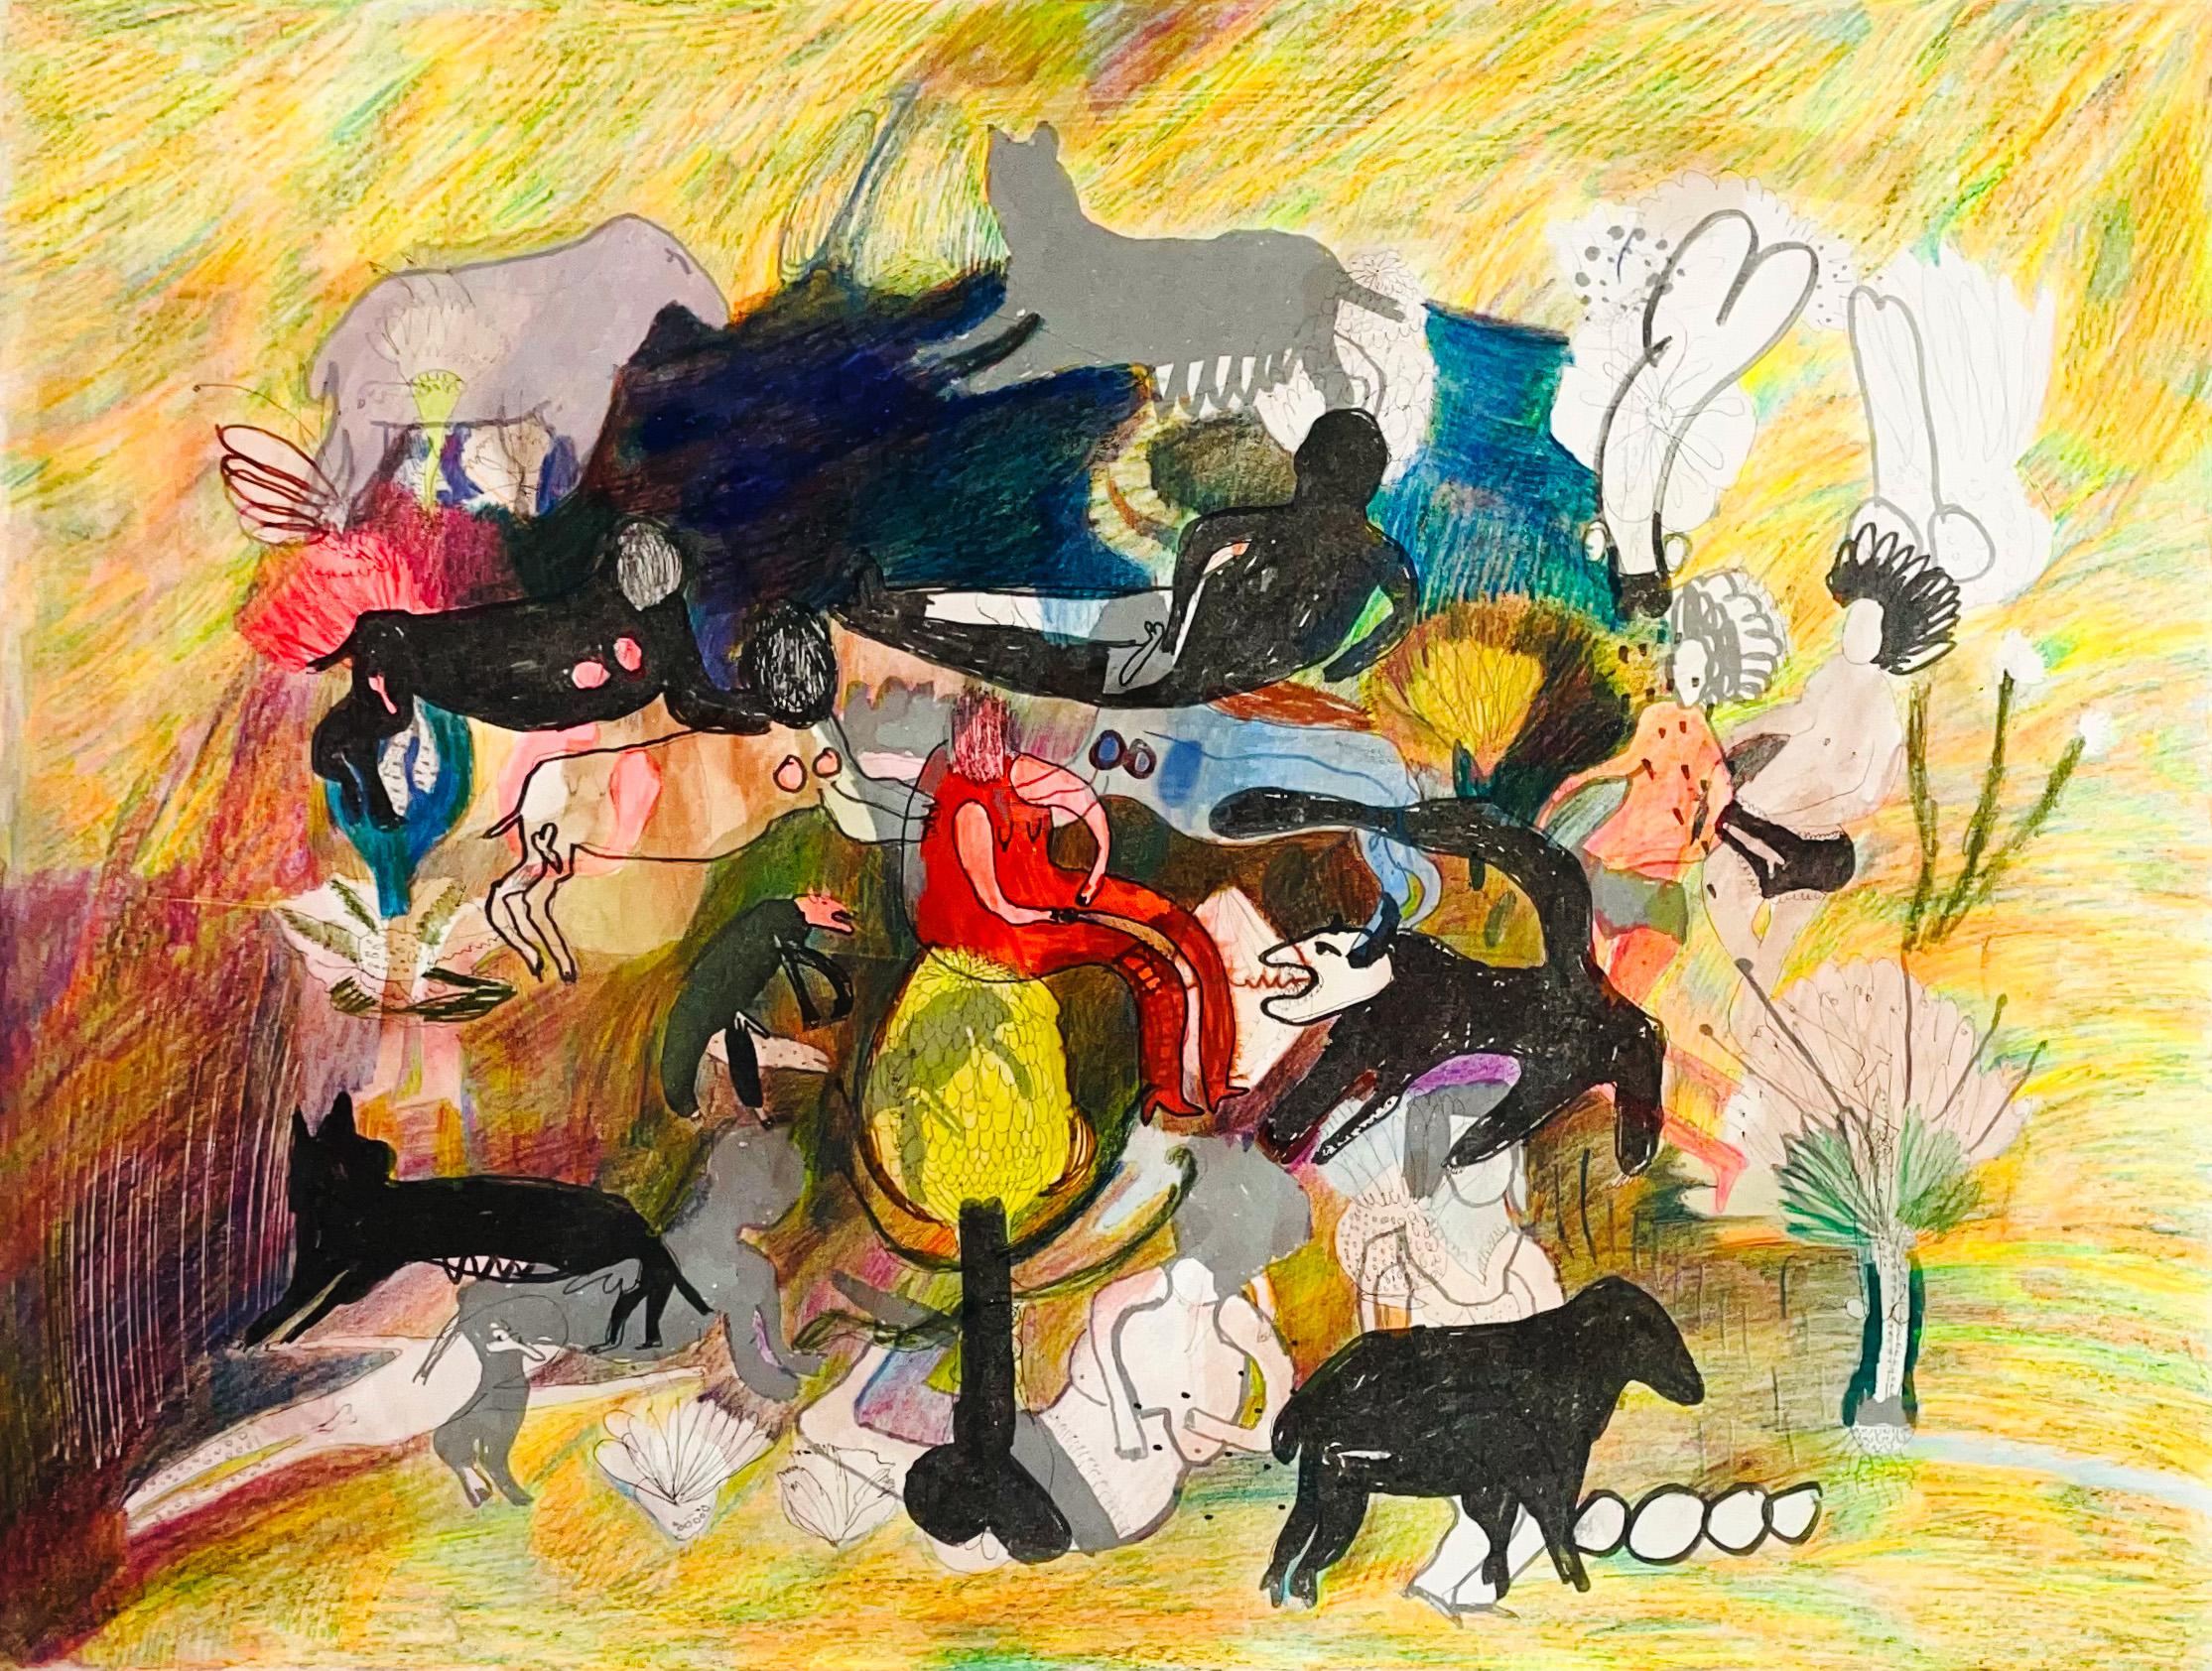 "Yo animal" contemporary lithography, animal gathering, colors